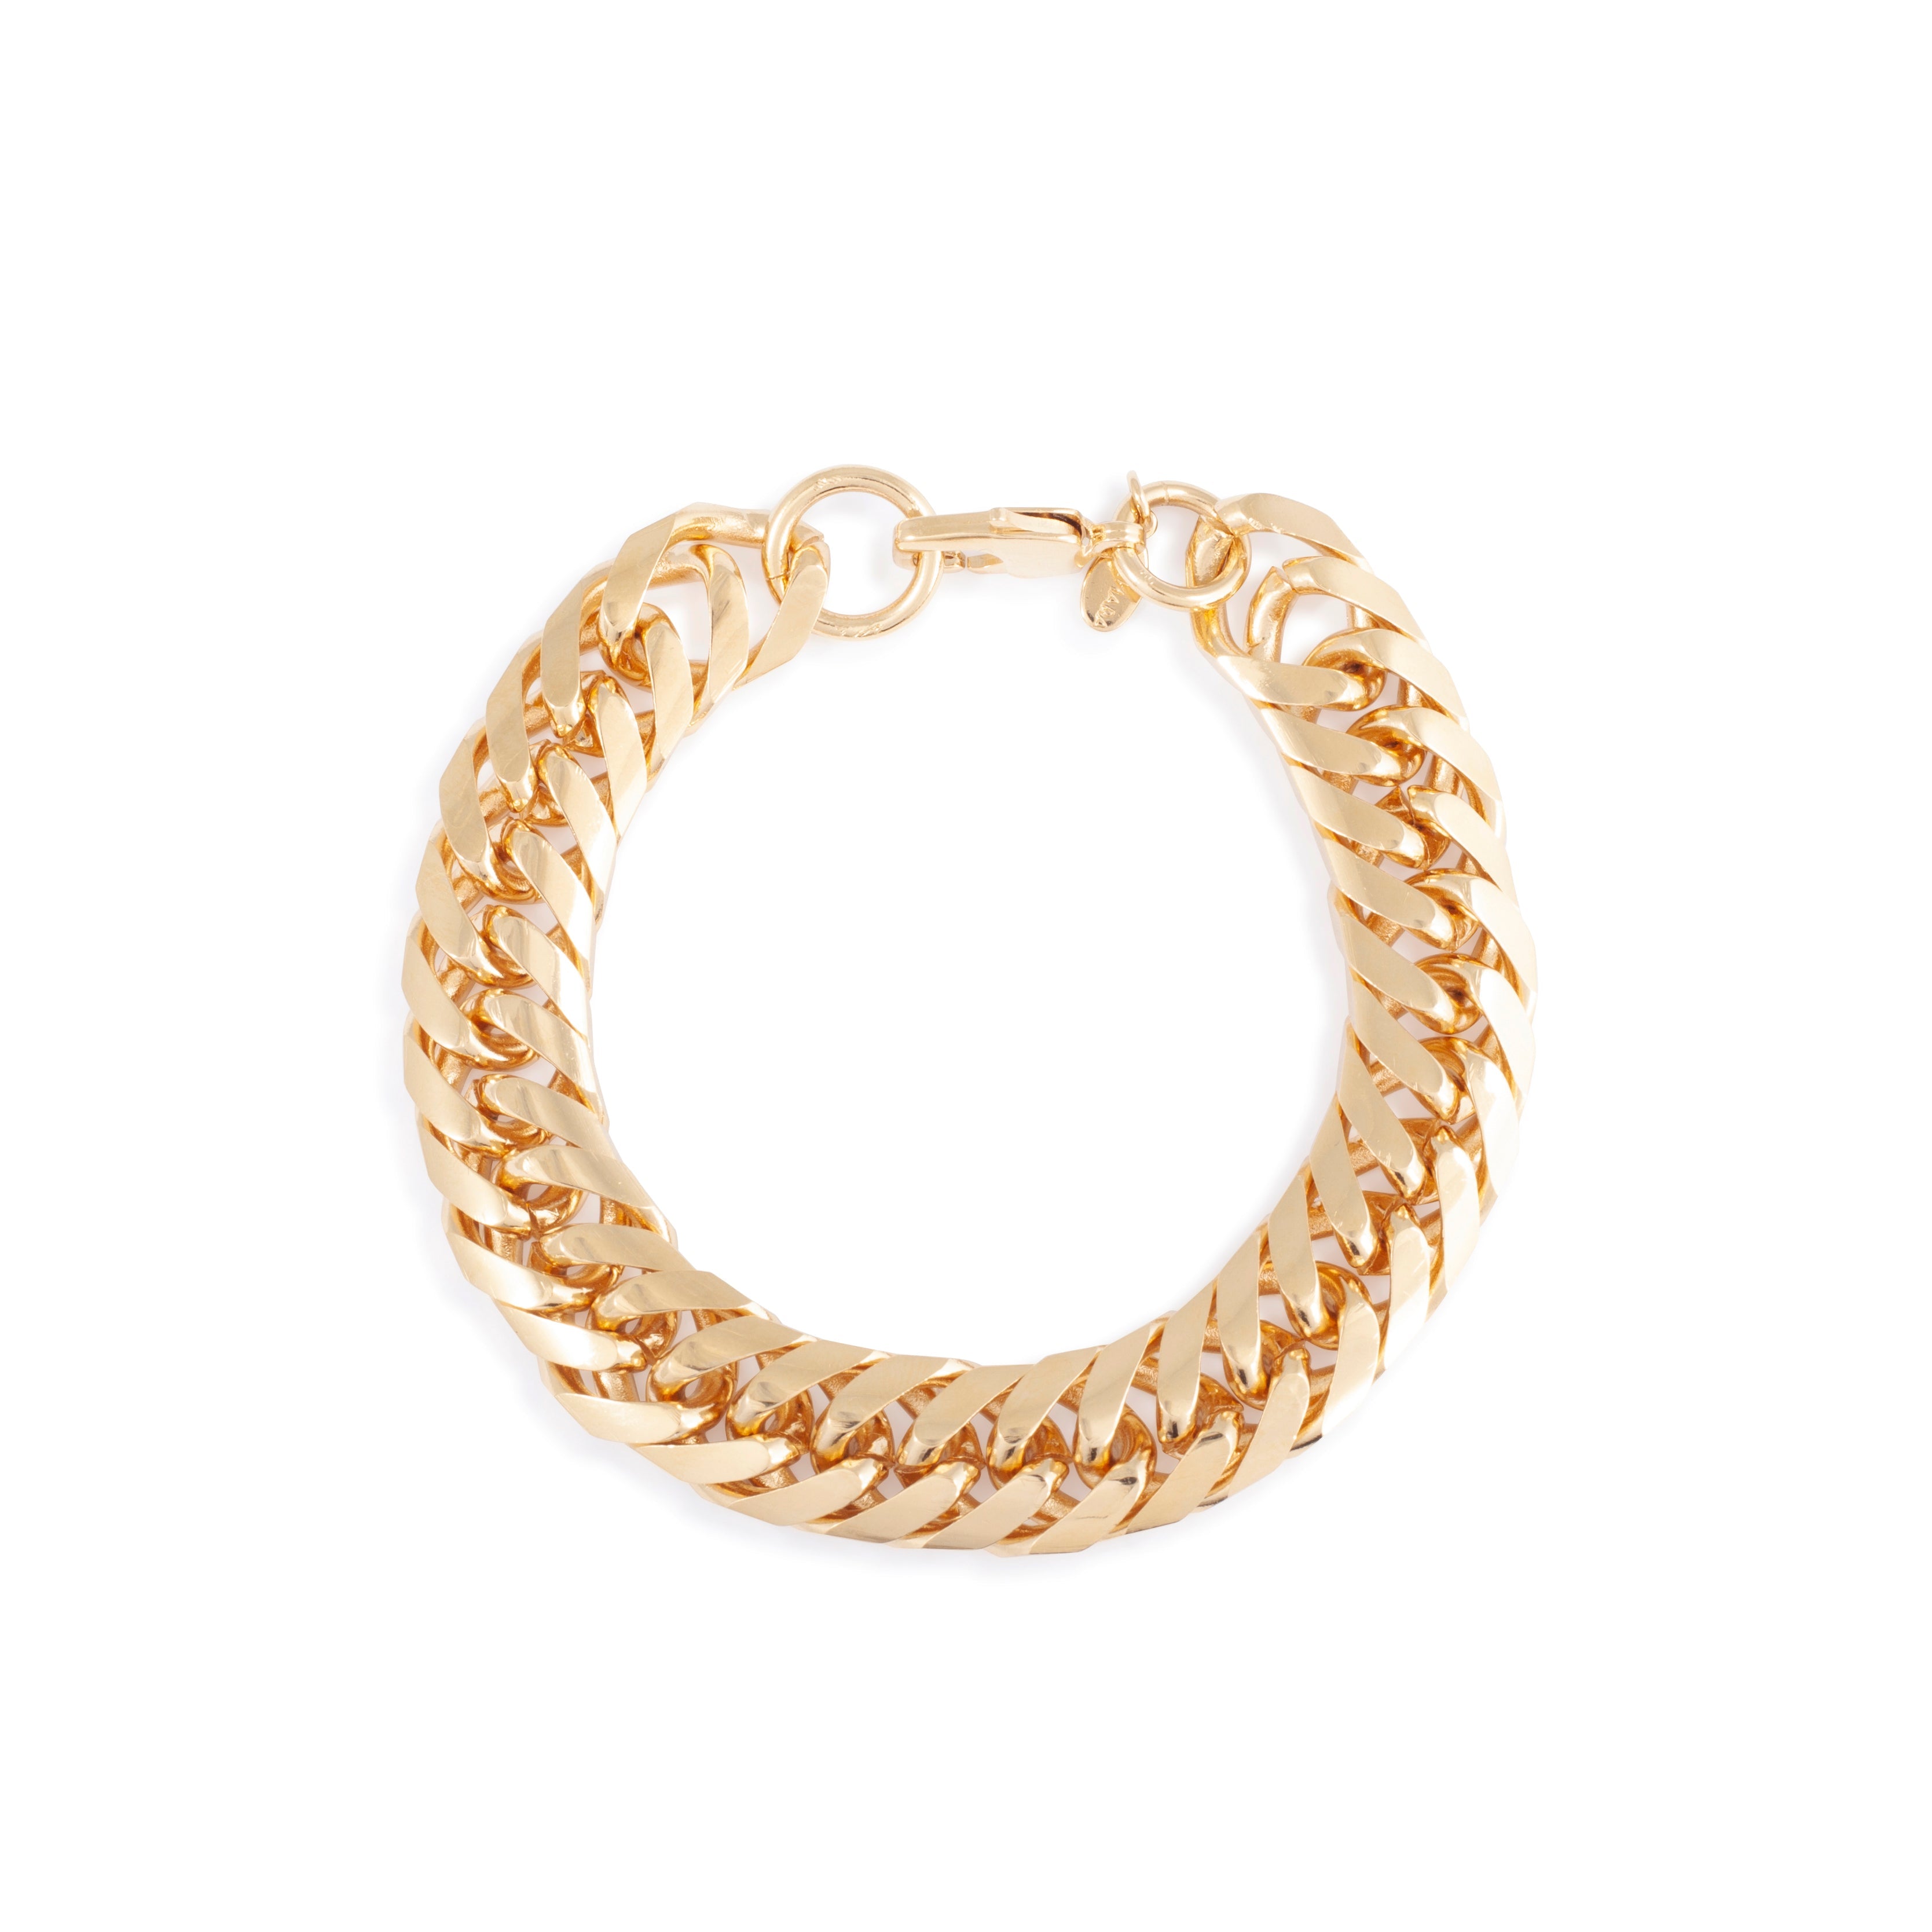 Gold thick chain bracelet